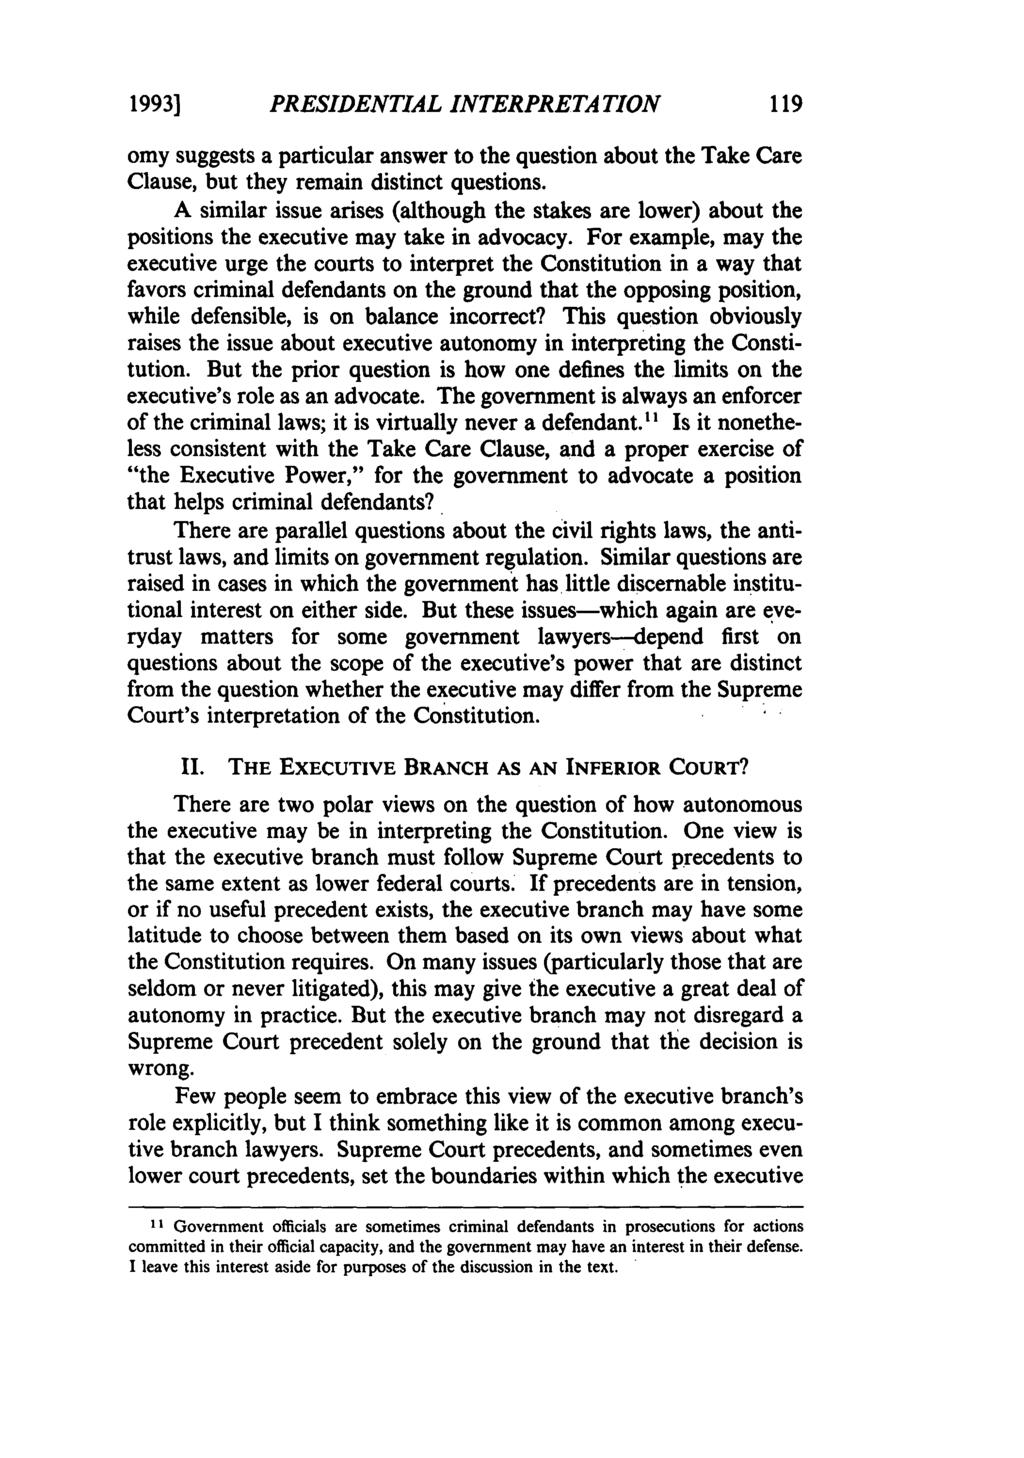 1993] PRESIDENTIAL INTERPRETATION omy suggests a particular answer to the question about the Take Care Clause, but they remain distinct questions.